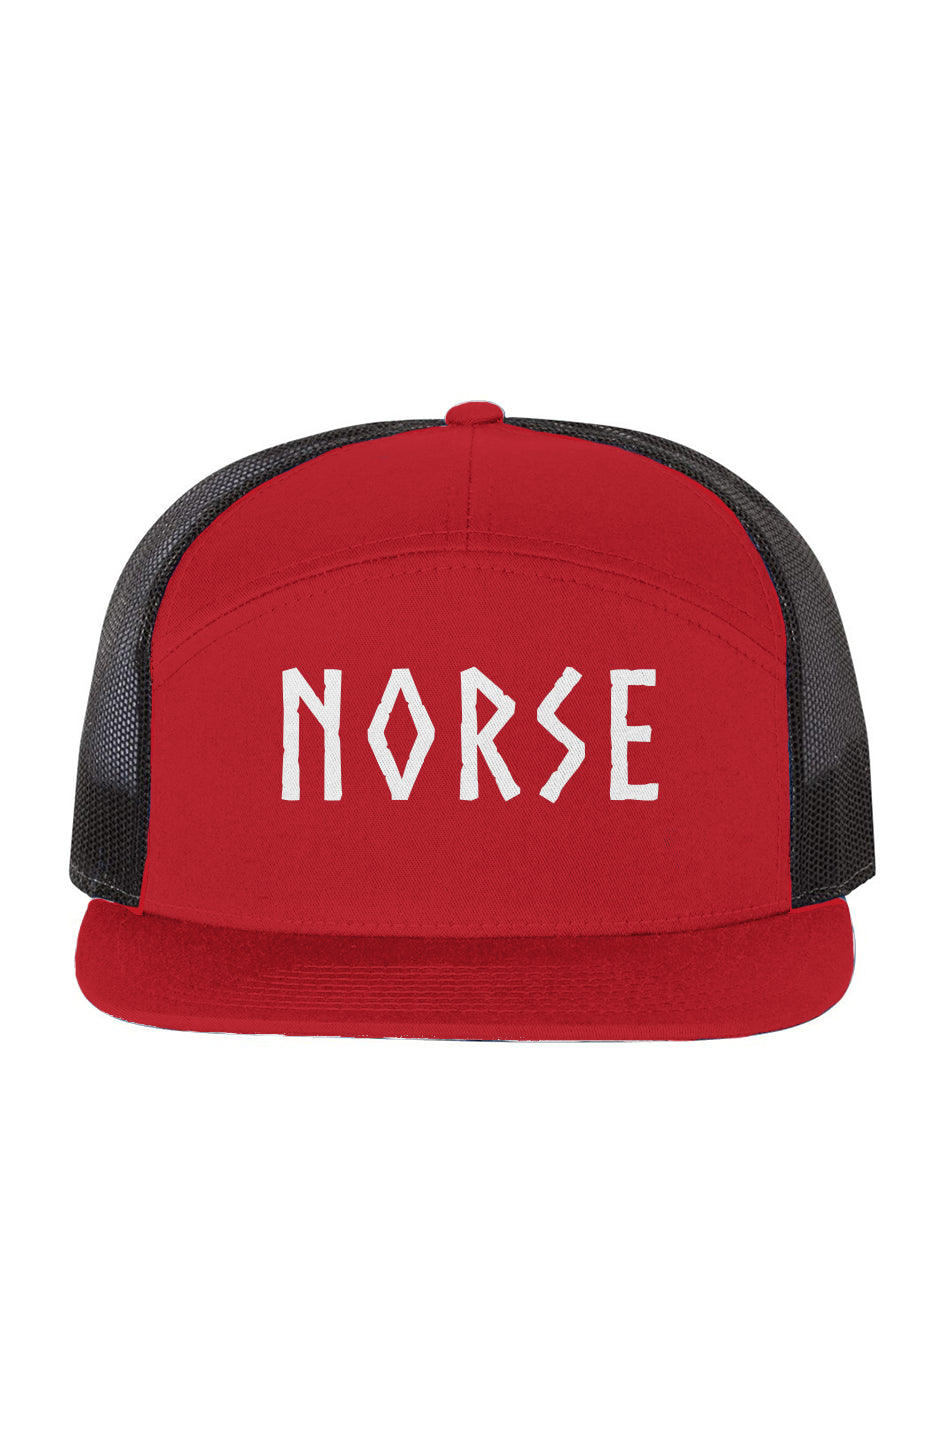 Embroidered Richardson 168 7-Panel Trucker Hat RedBlack | Norse Hockey Letters